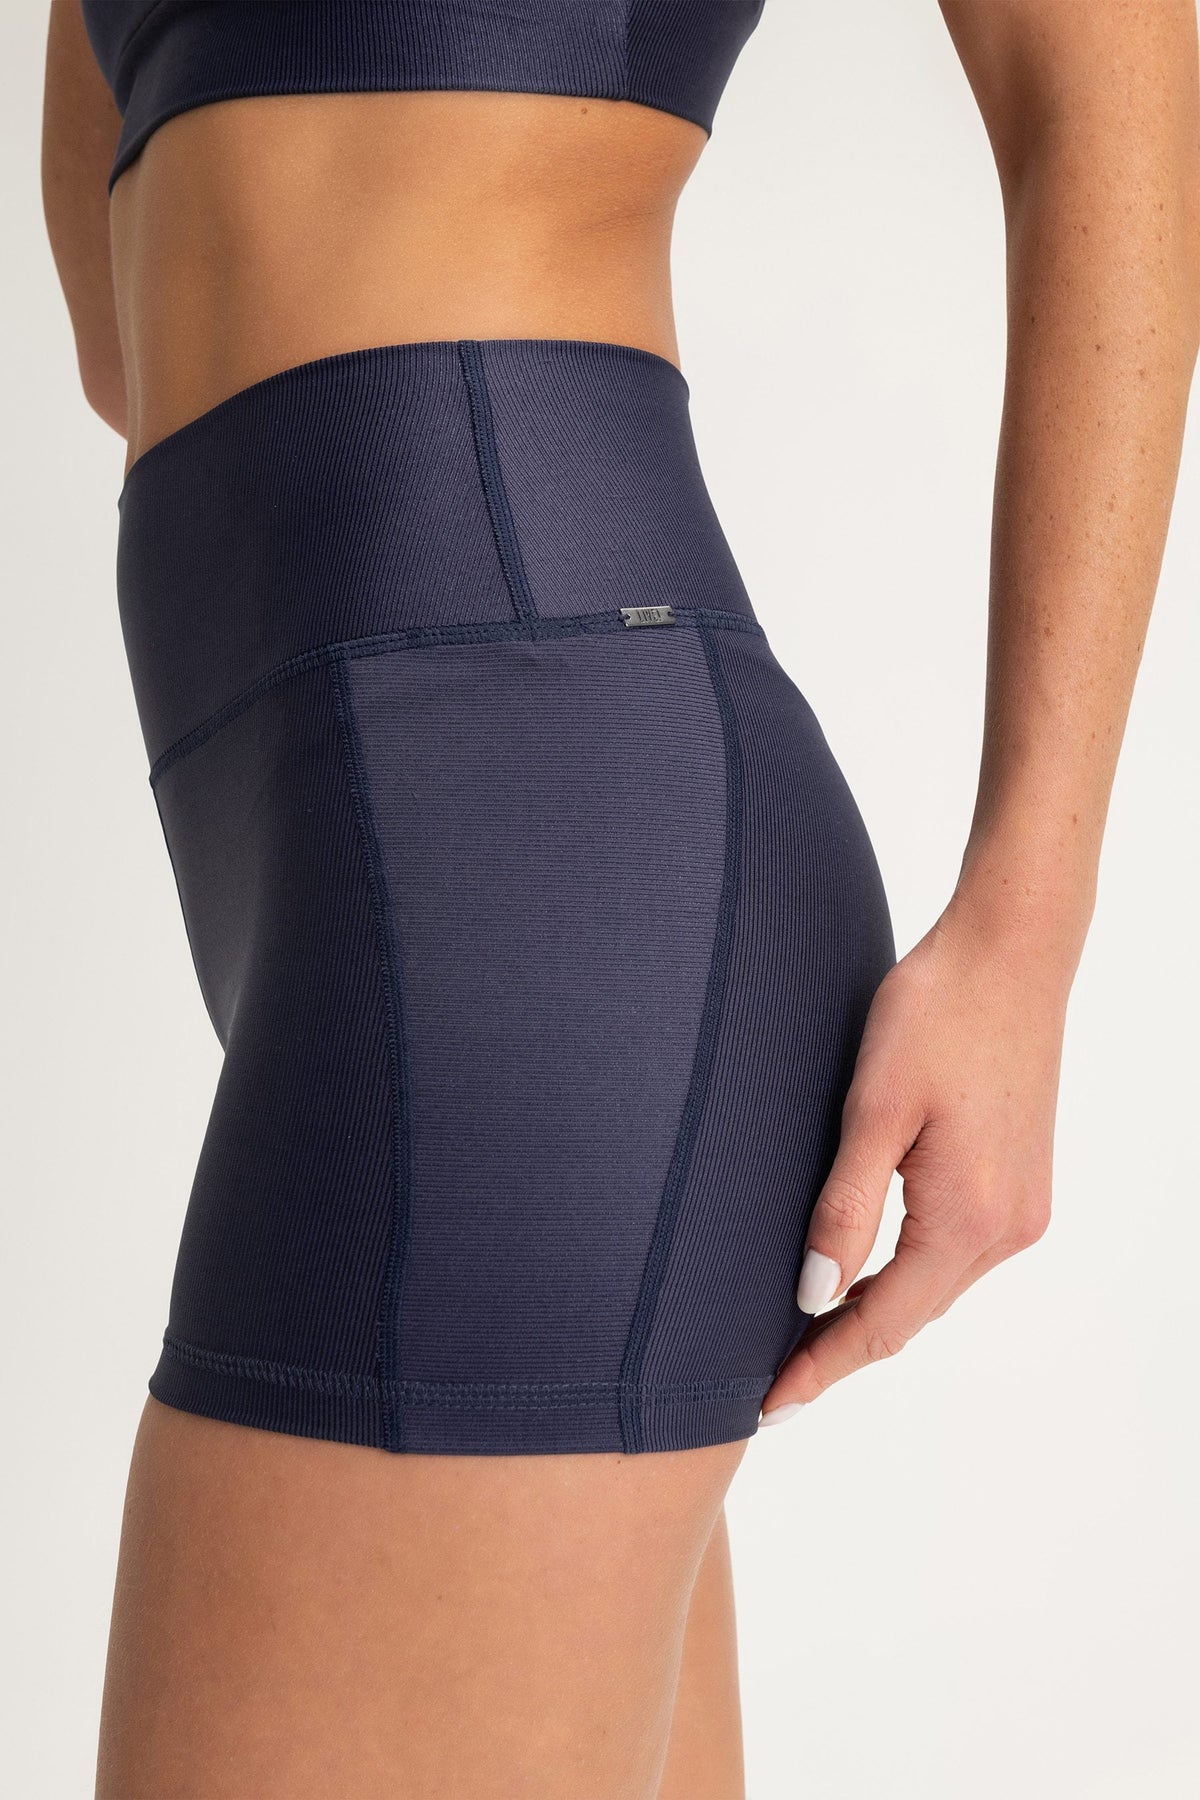 Allure® Fit Shorts